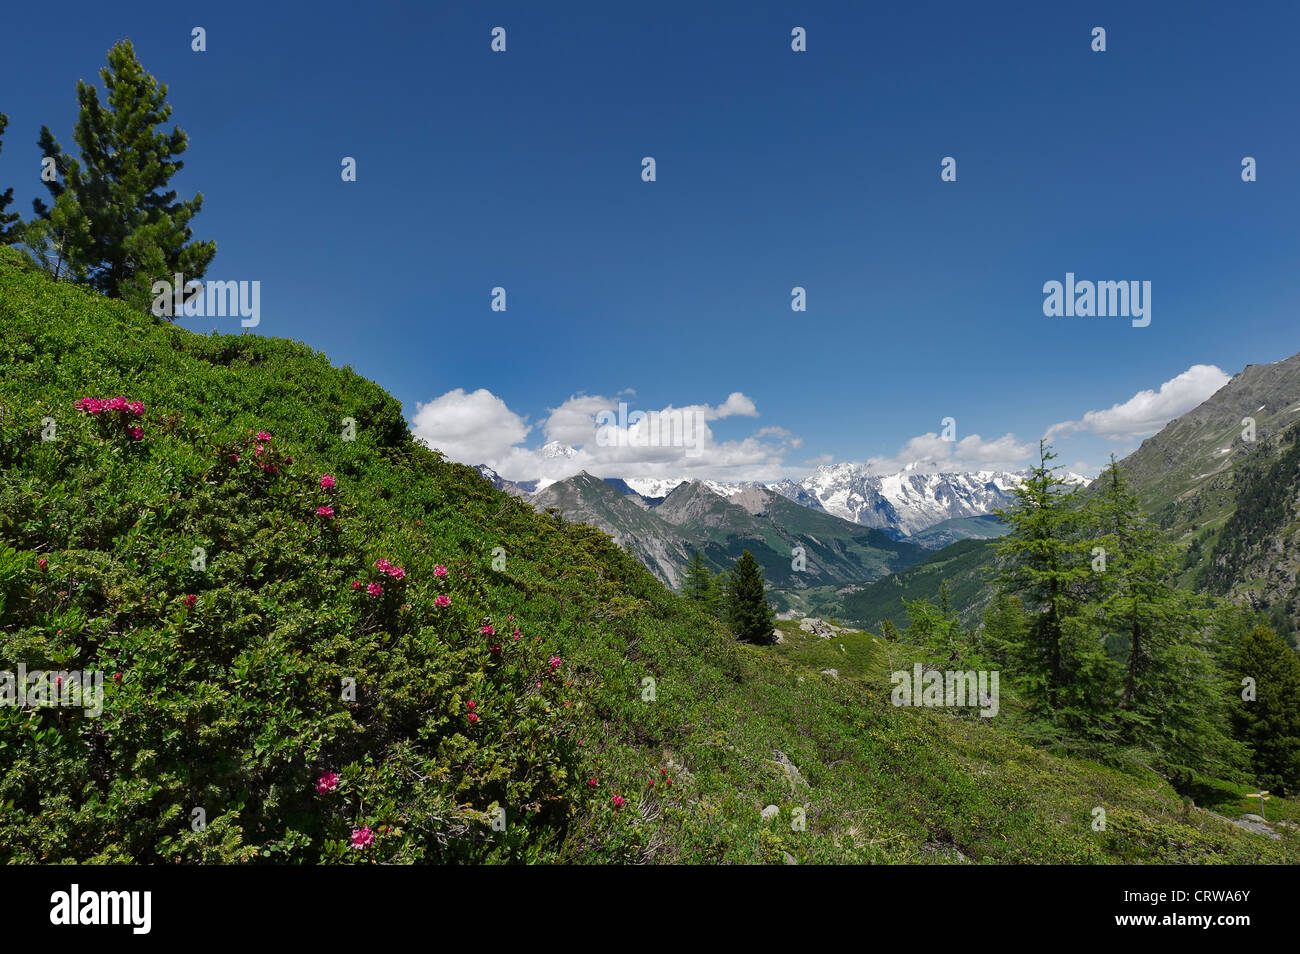 rhododendrons bush with the chain of the Mount Blanc in the background, Aosta valley, Italy Stock Photo